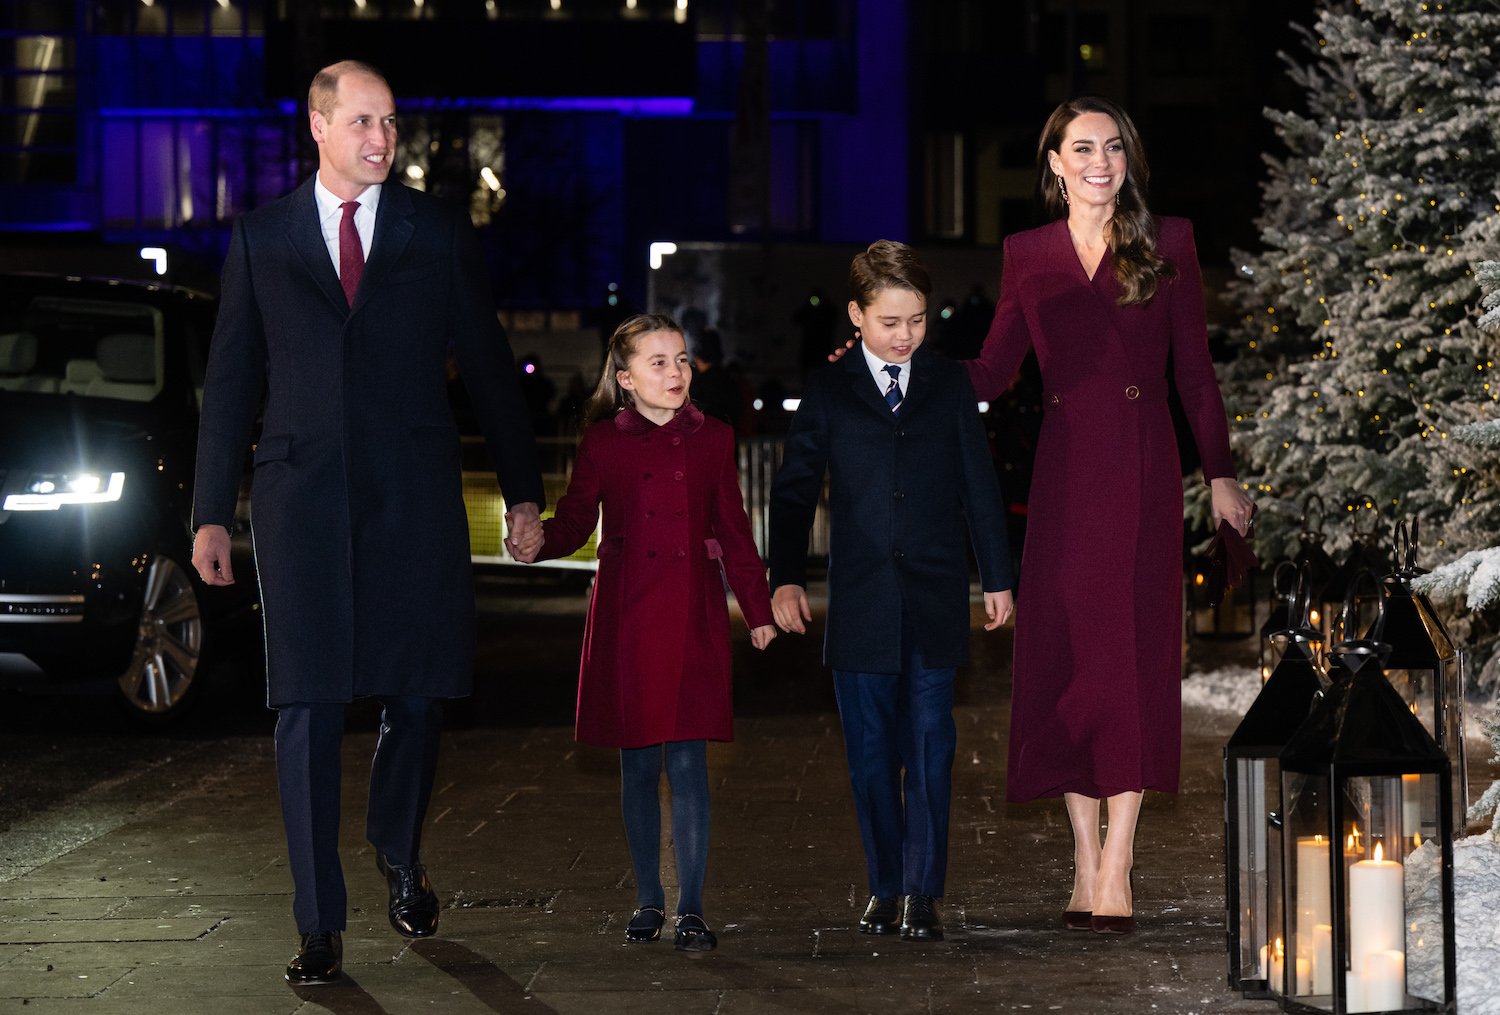 Prince William and Kate Middleton body language at 2022 Christmas carol concert service